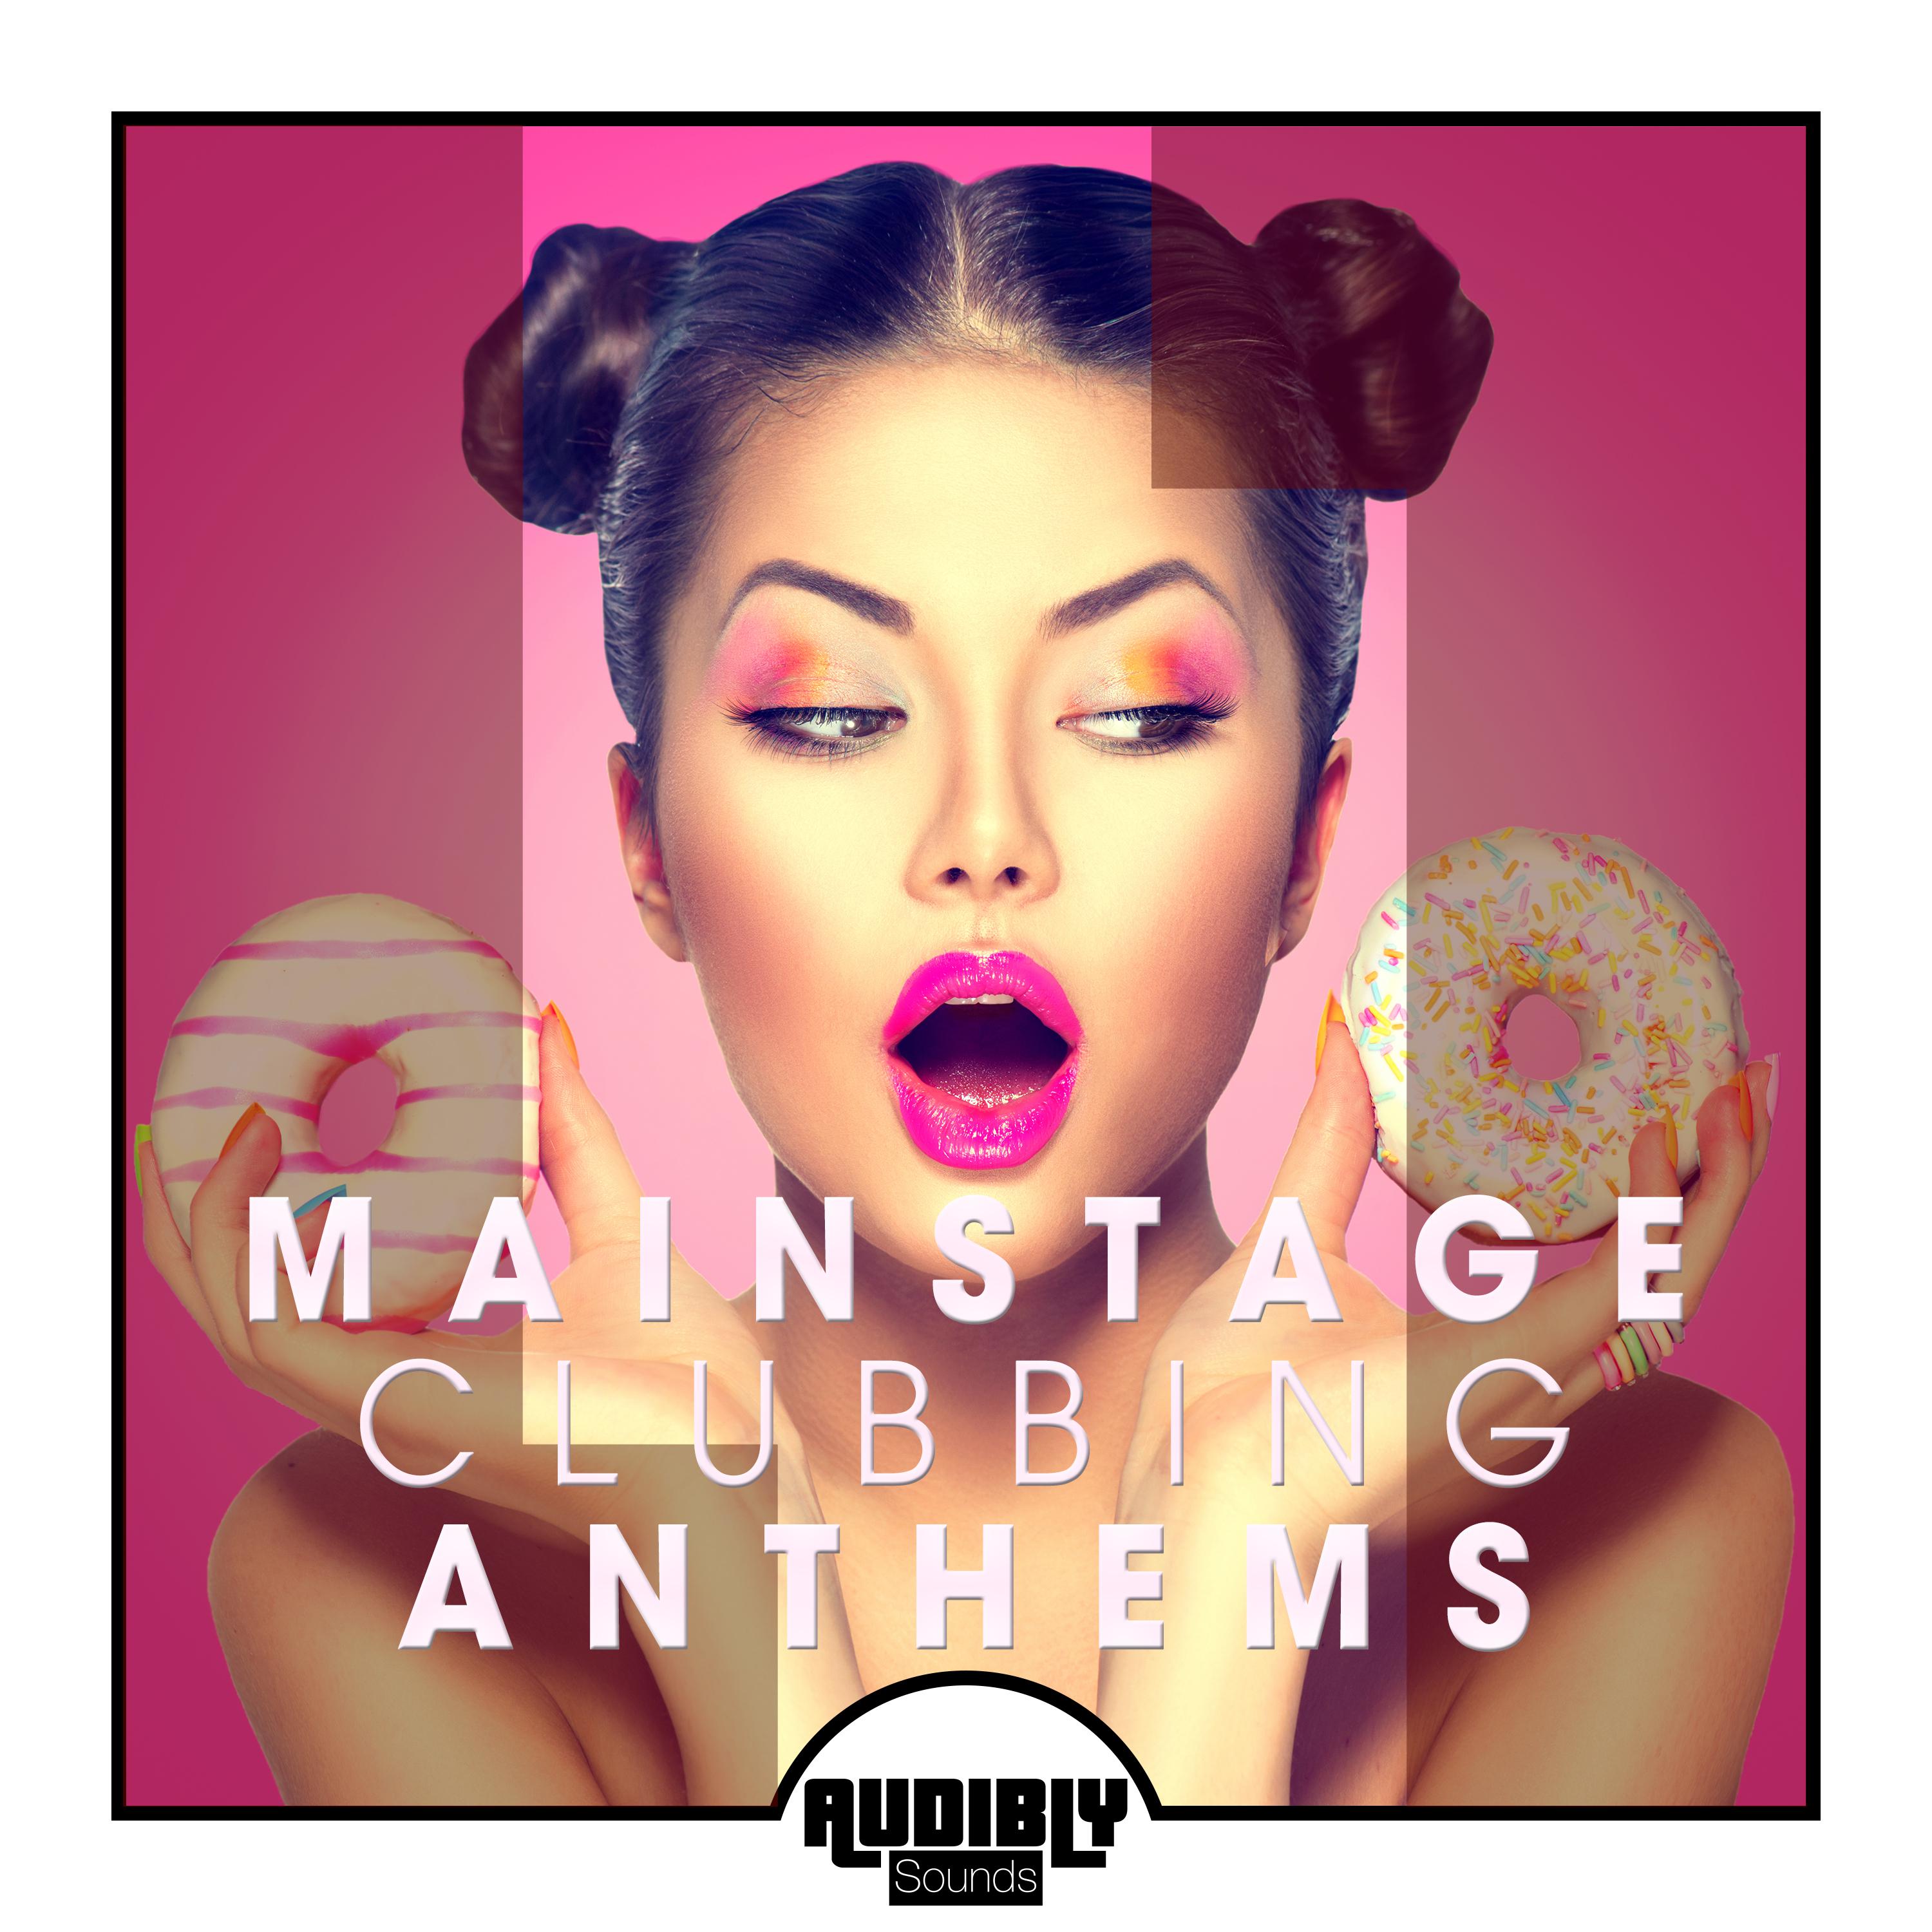 Mainstage Clubbing Anthems, Vol. 1